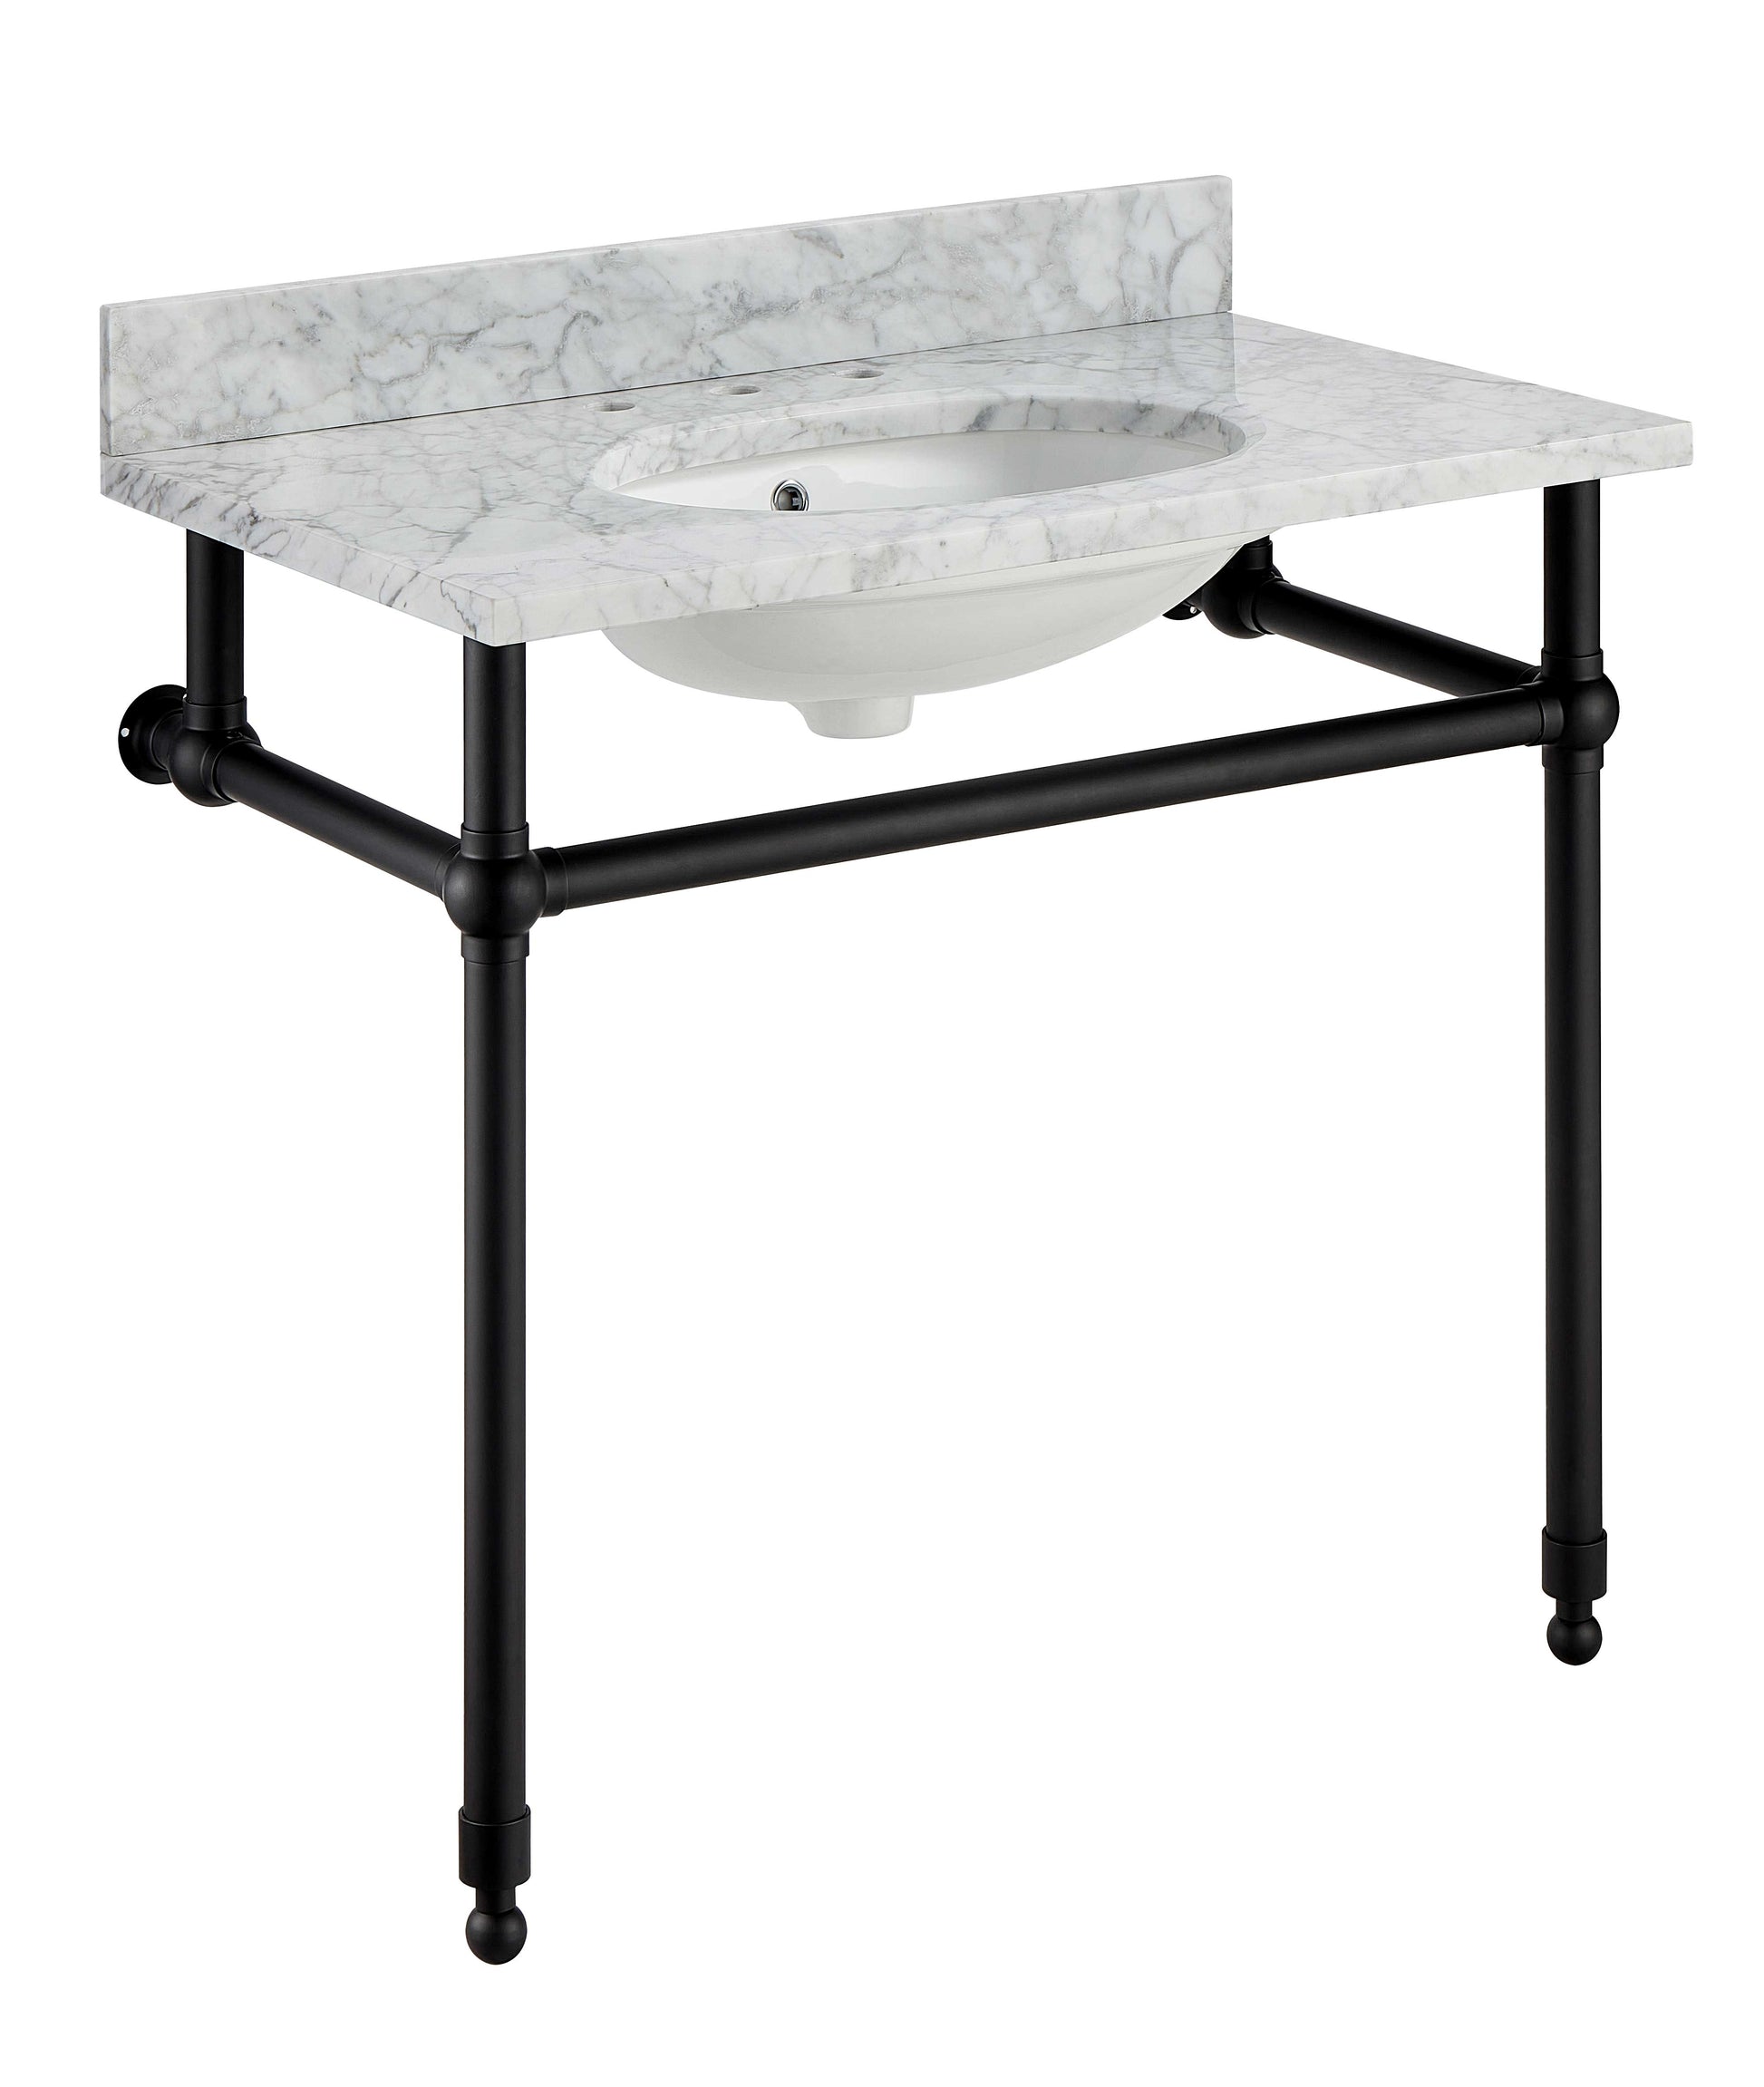 CS-FGC004-MB - Verona 34.5 in. Console Sink in Matte Black with Carrara White Counter Top